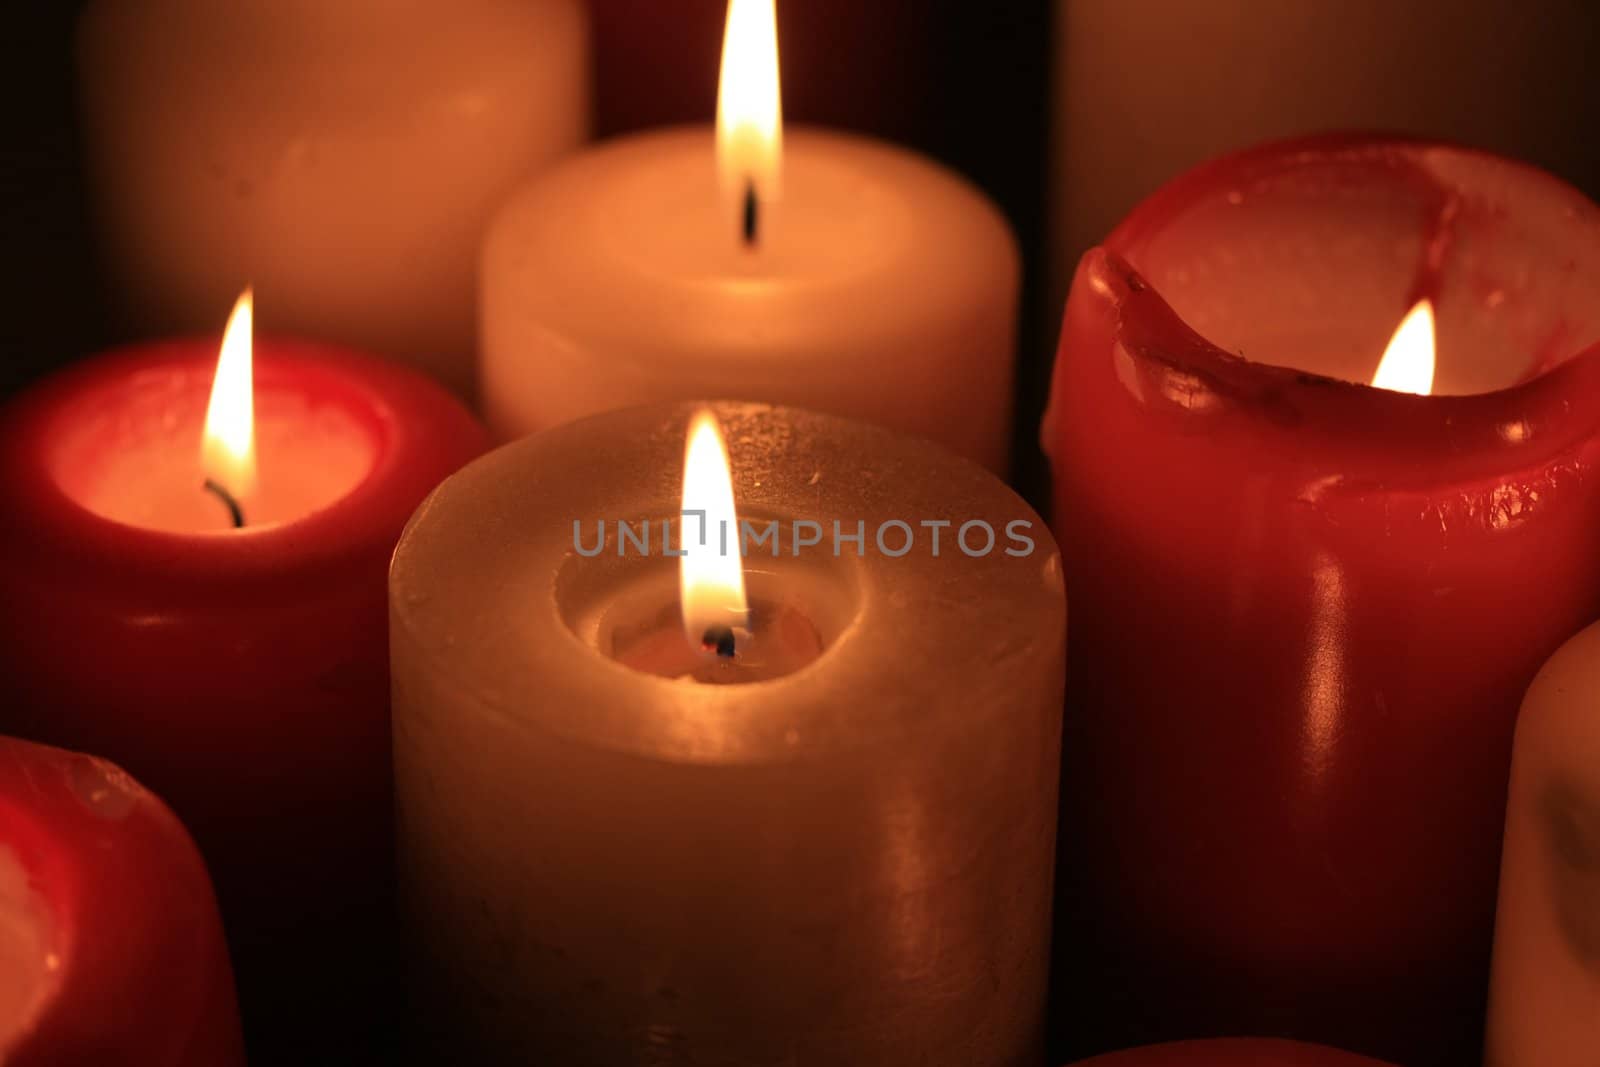 A group of burning candles, red and white